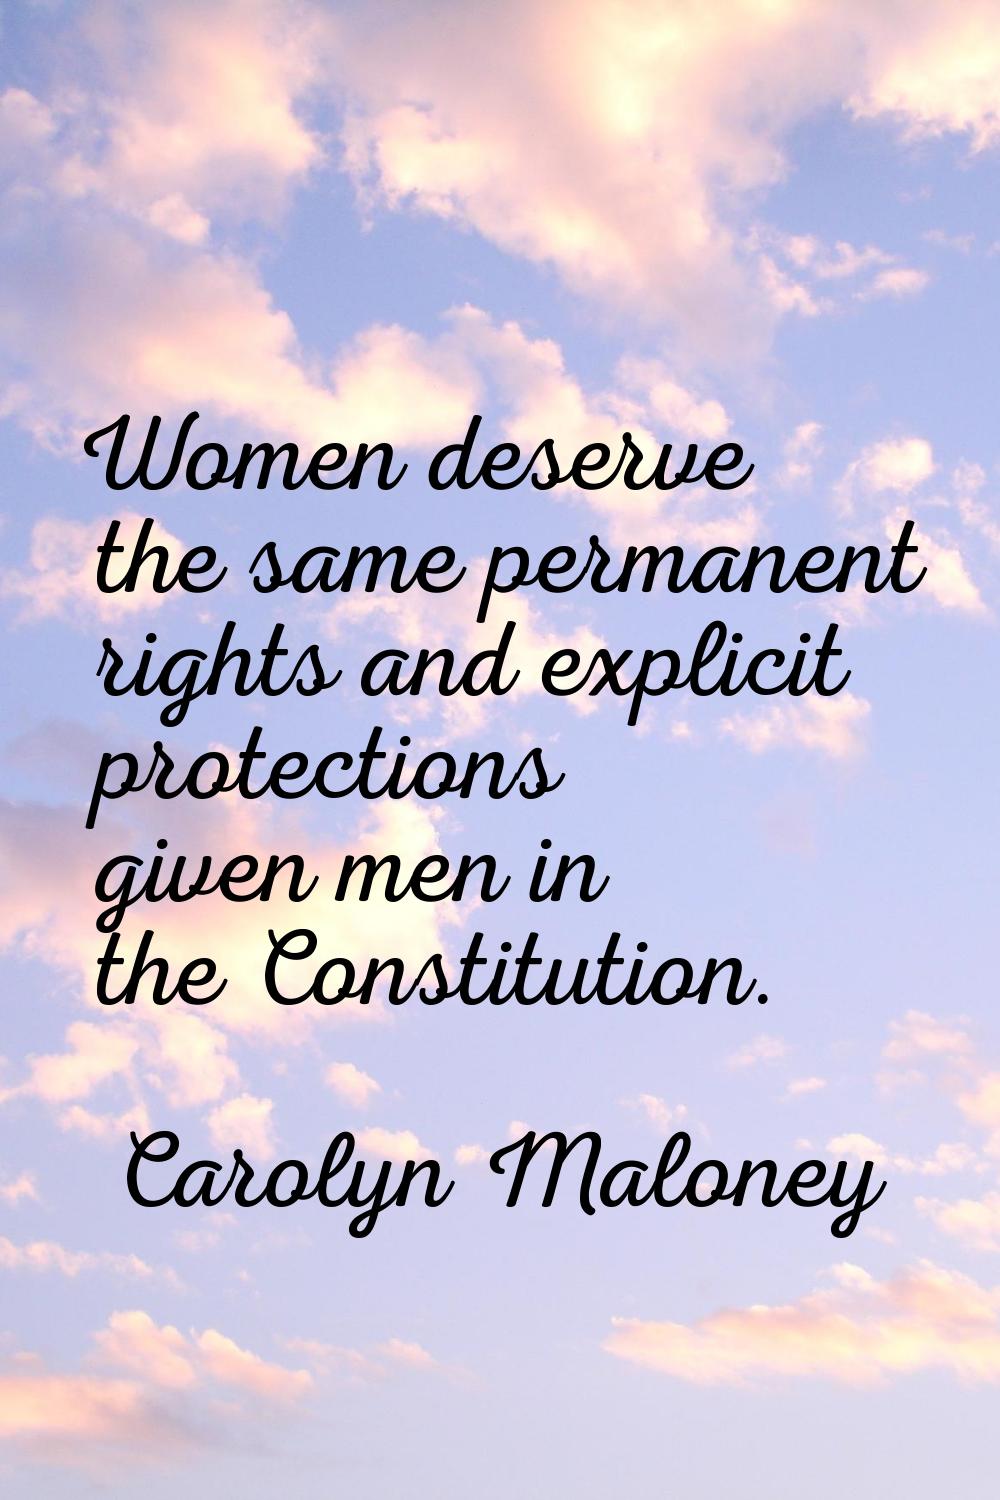 Women deserve the same permanent rights and explicit protections given men in the Constitution.